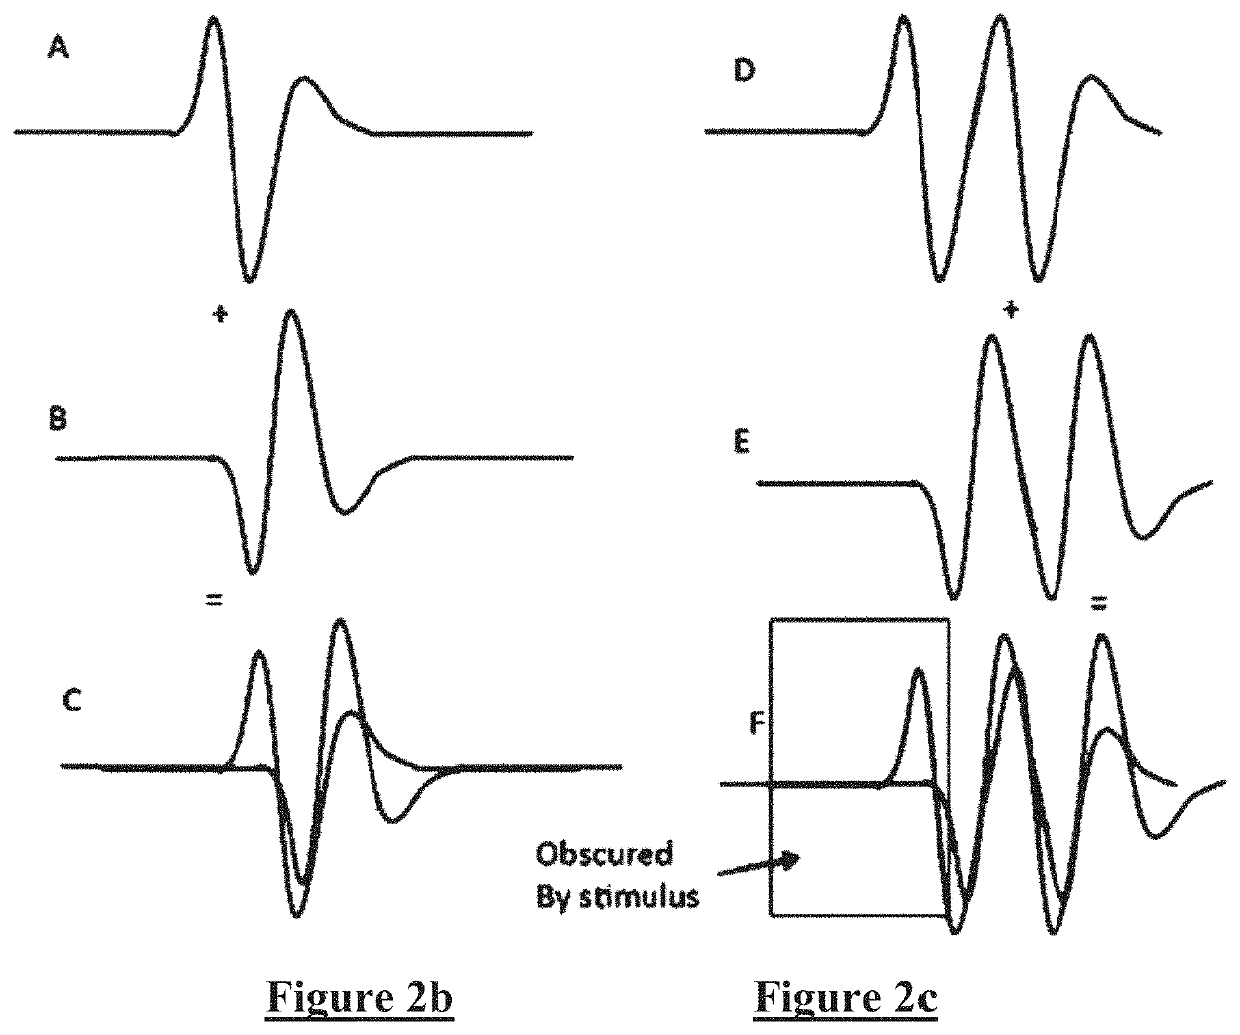 Assessing Neural State from Action Potentials